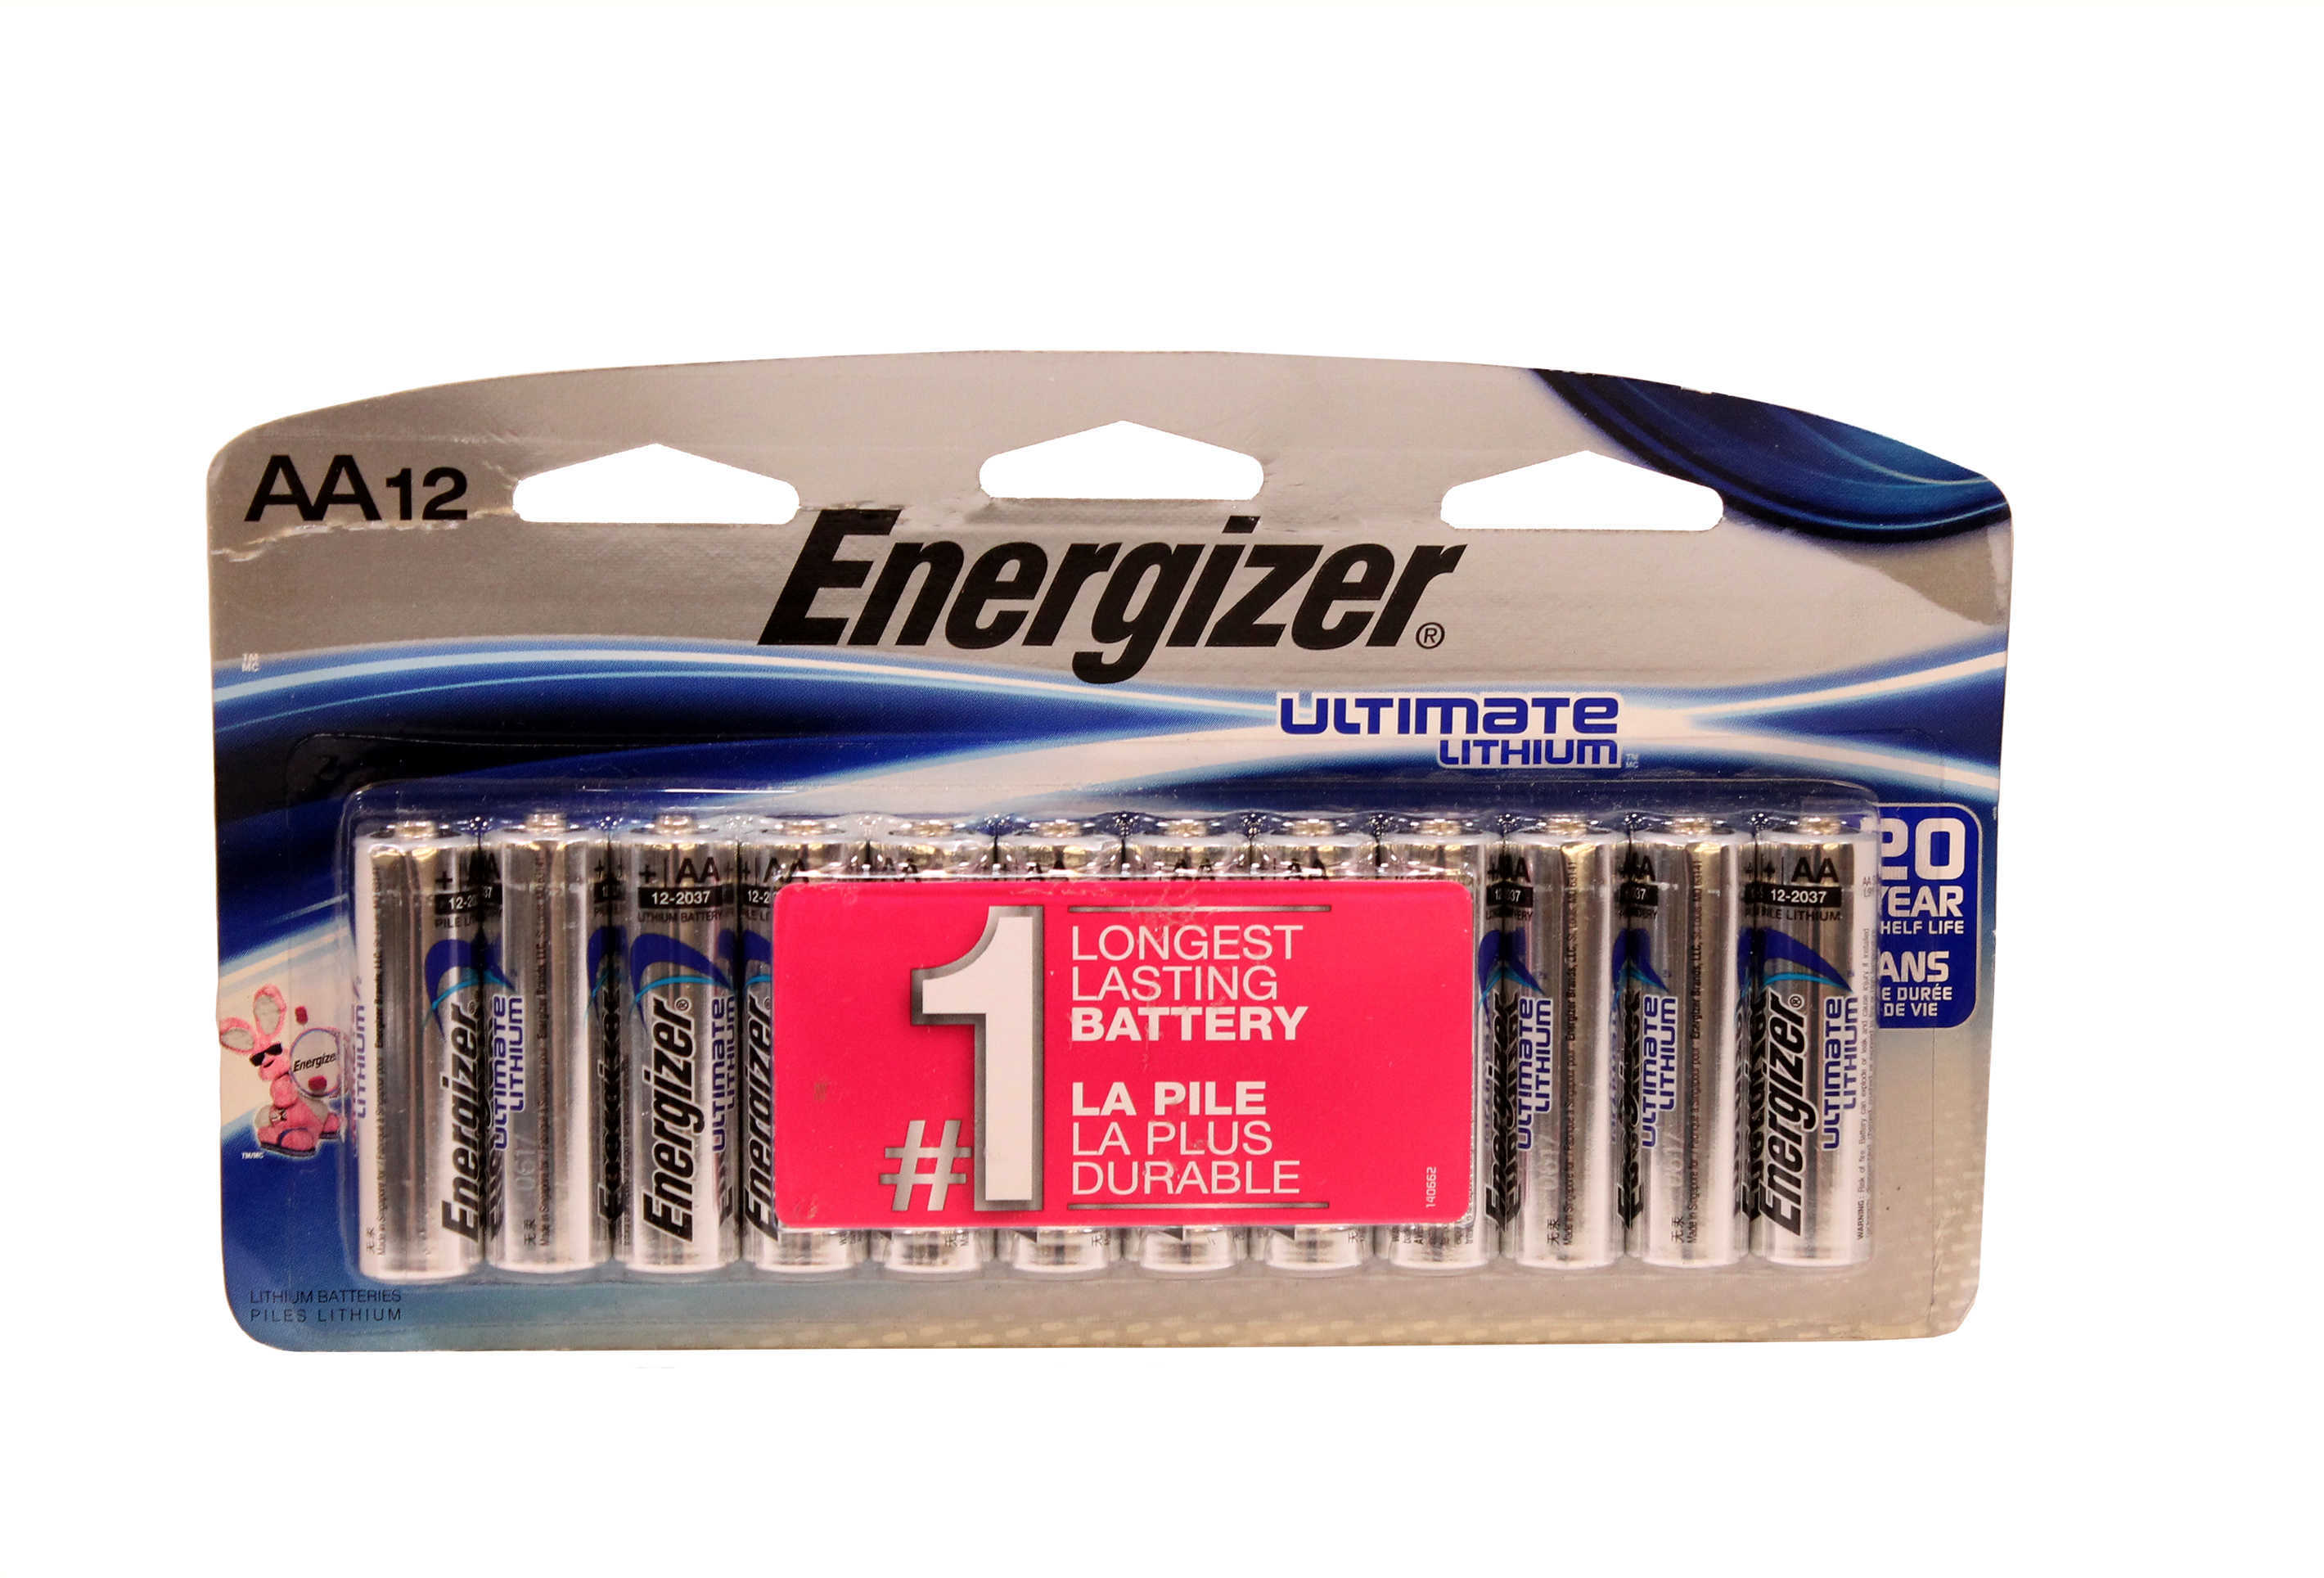 Energizer Ultimate Lithium Batteries AA 12-Pack